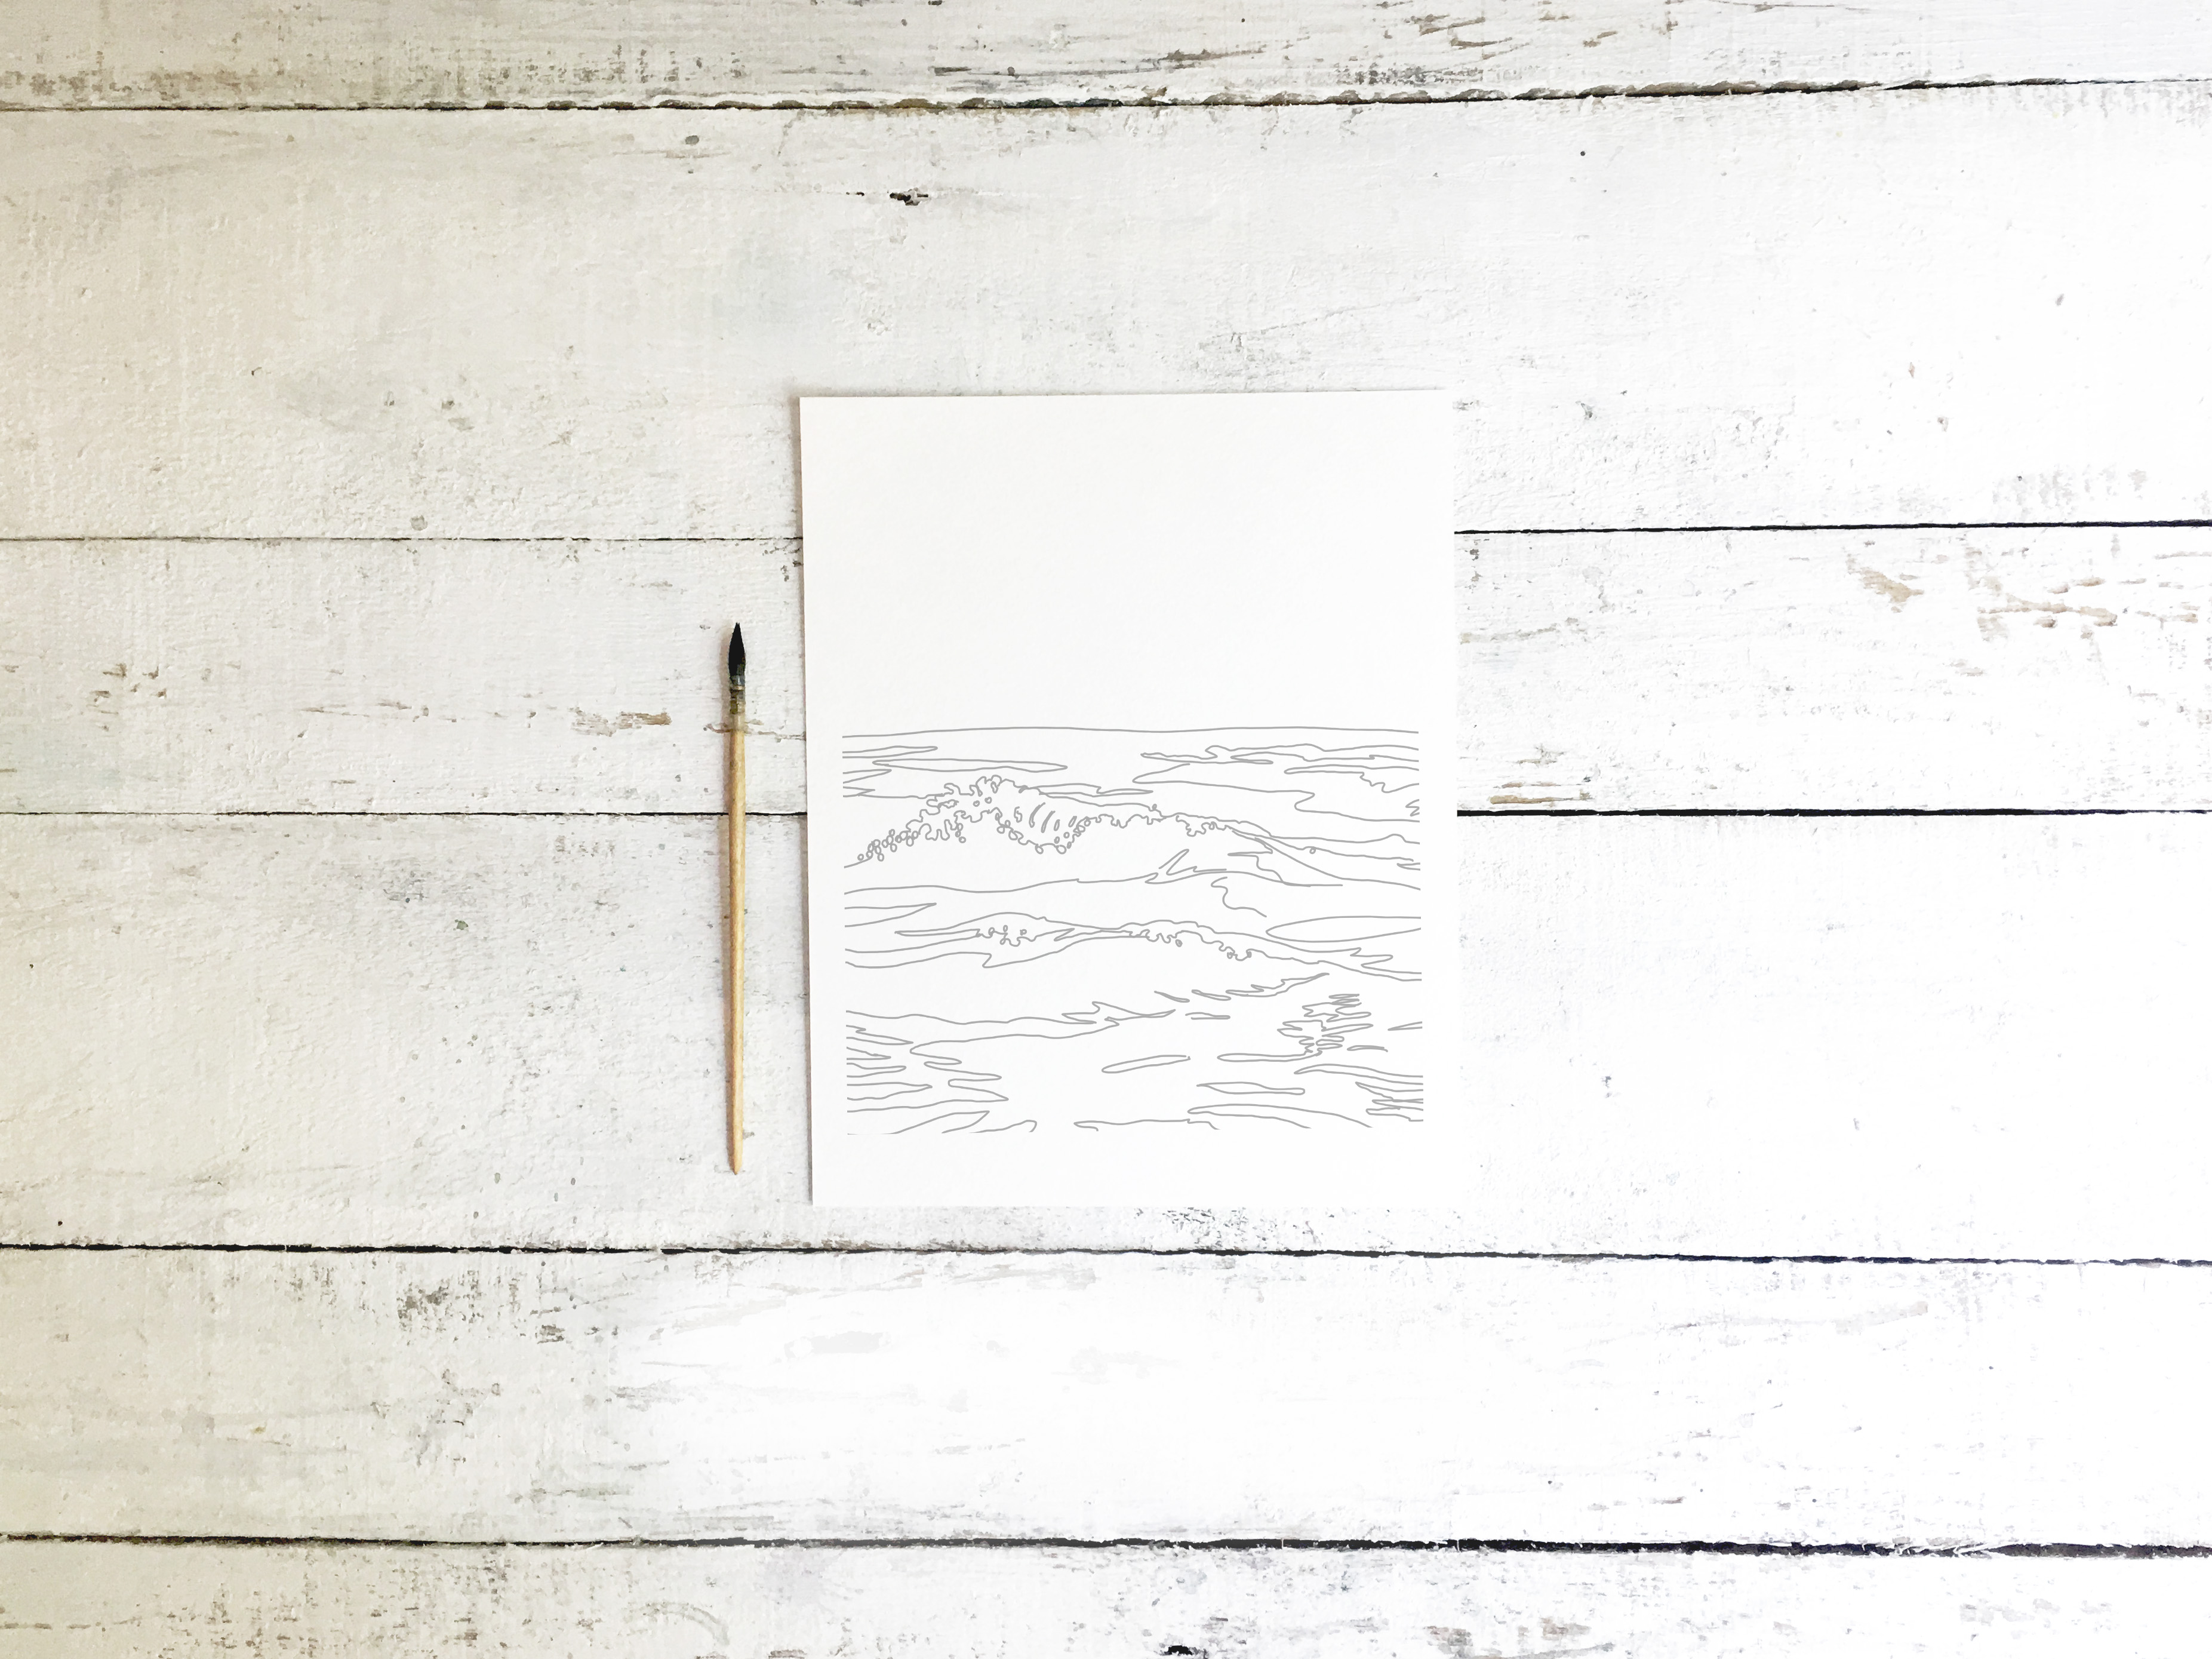 Watercolor Coloring Sheet (For Adults!) Playful Ocean Wave Painting -Perfect For A DIY Girls Painting Party Night!